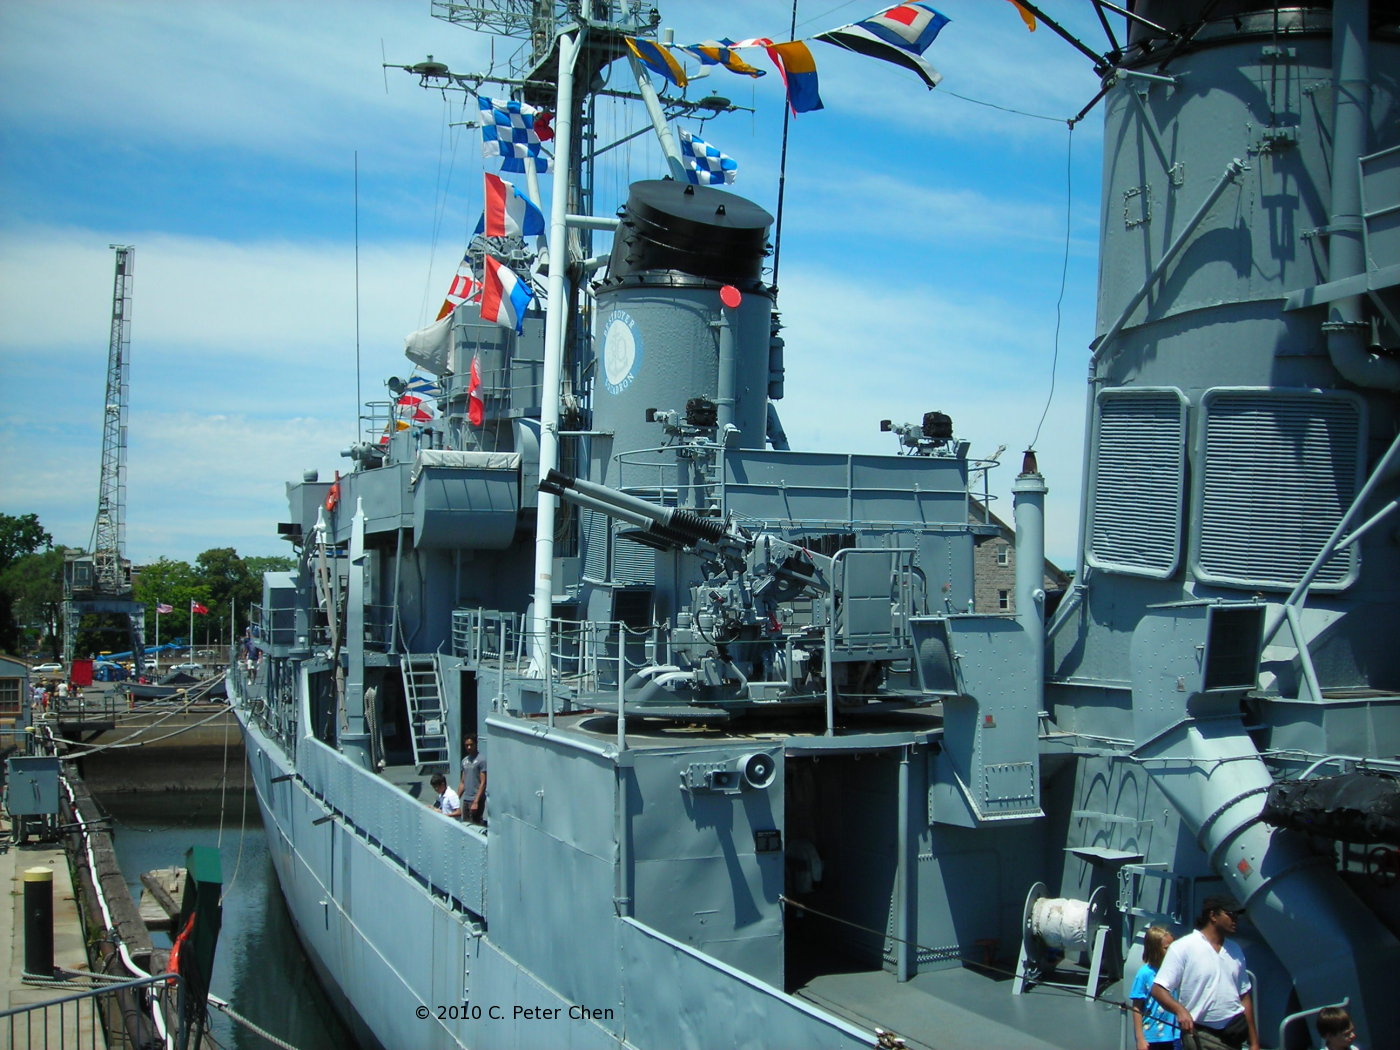 View of port side amidships of museum ship USS Cassin Young, Boston, Massachusetts, United States, 4 Jul 2010; note quadruple 40mm Bofors anti-aircraft gun mount